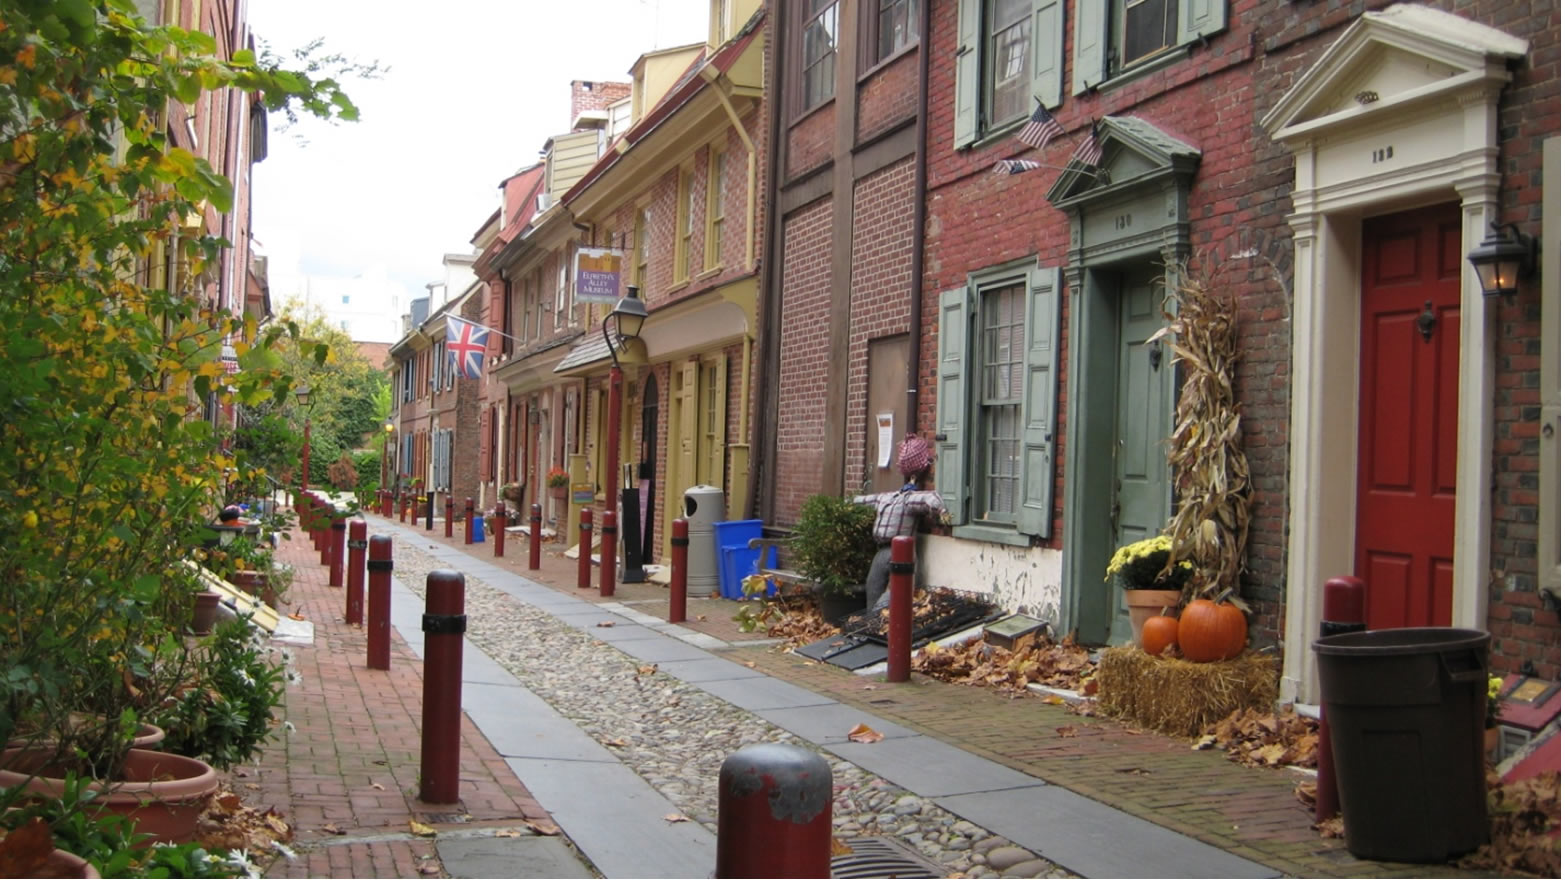 Panoramic view of Elfreth's Alley